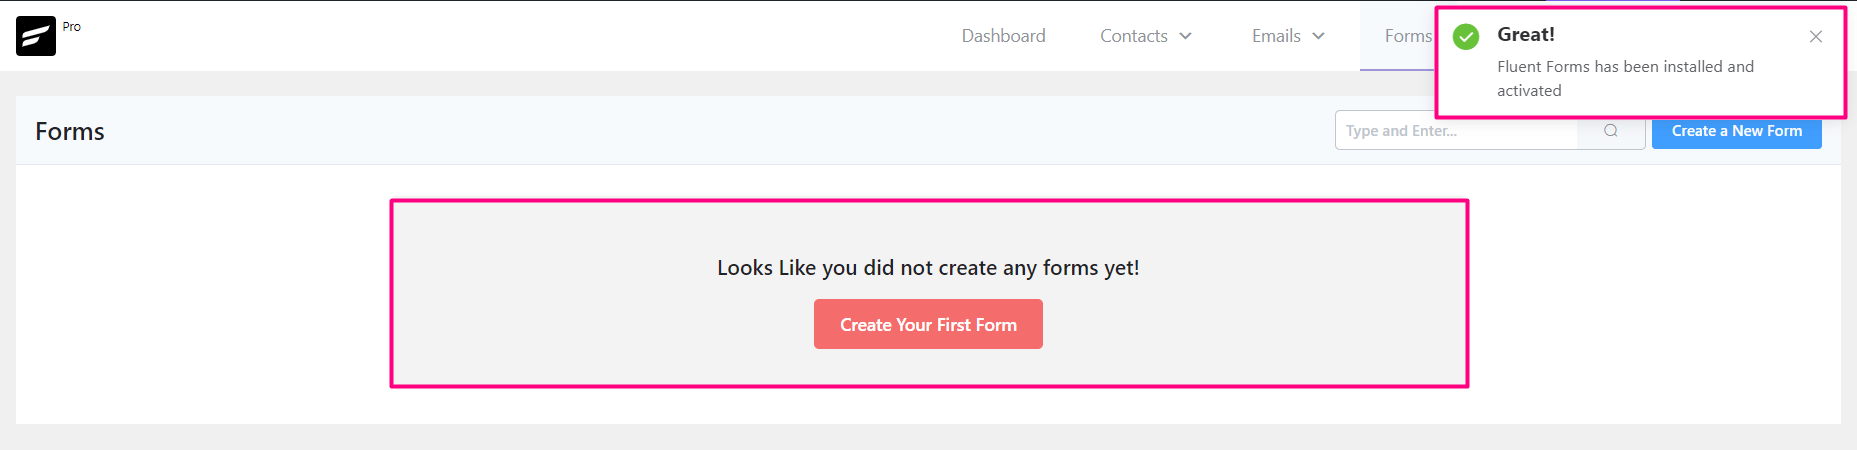 crm form activated new